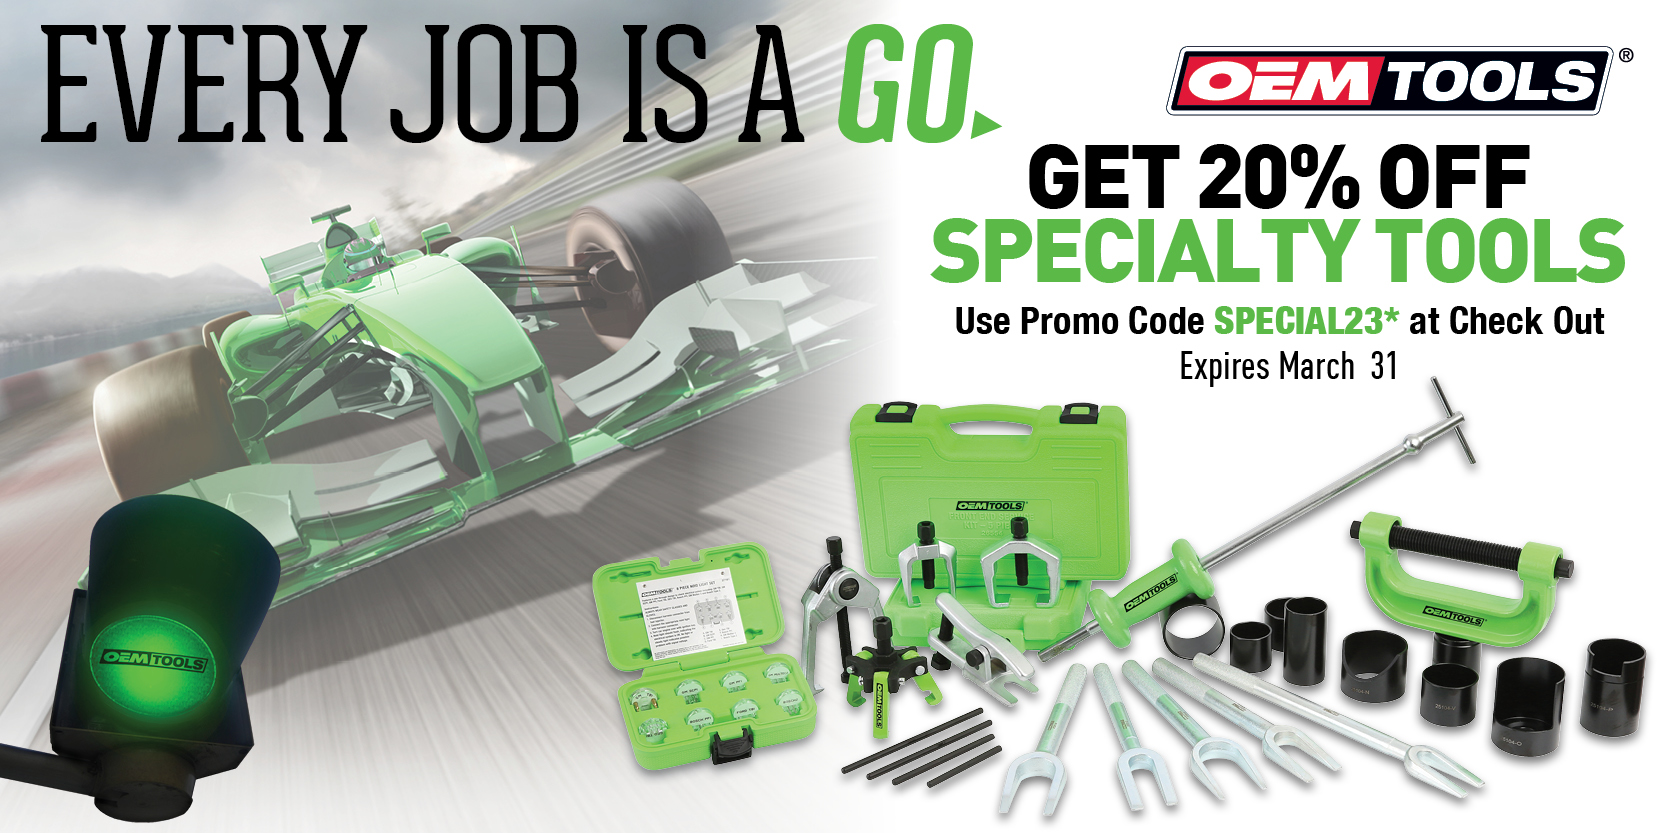 20% Off select OEMTOOLS Specialty Tools